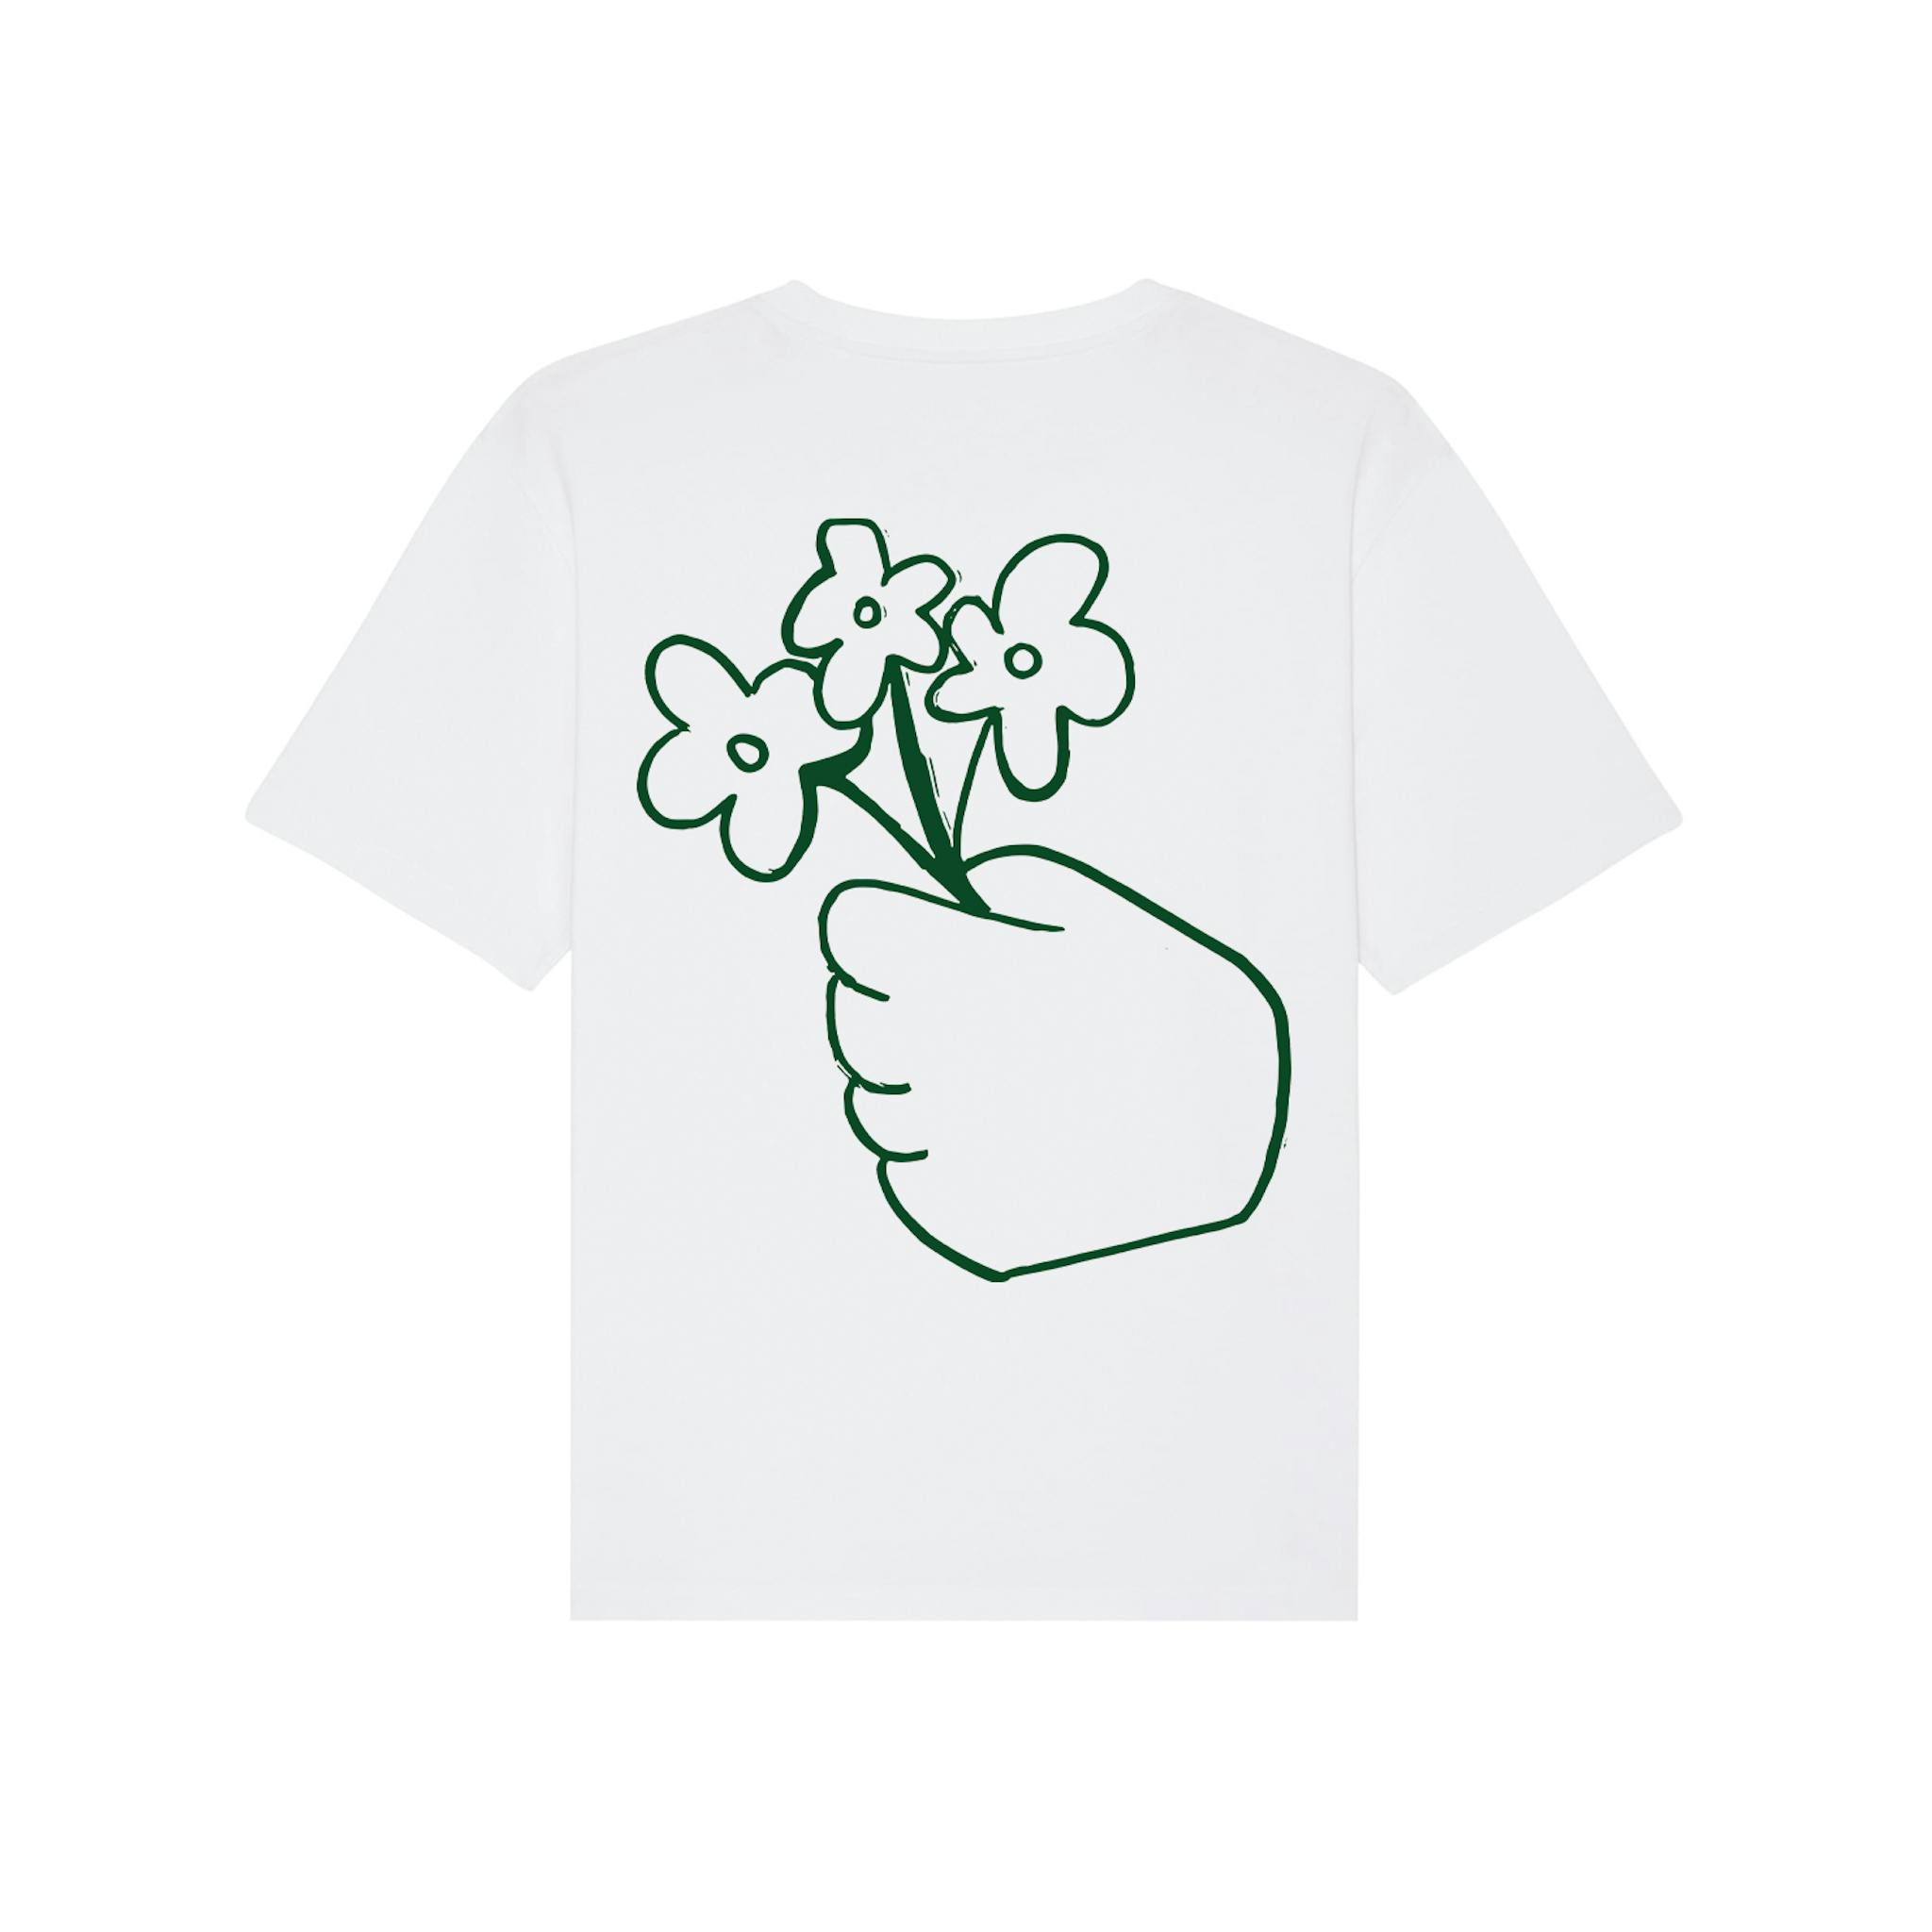 A white T-shirt with a green outline drawing of a hand holding three flowers on the back.